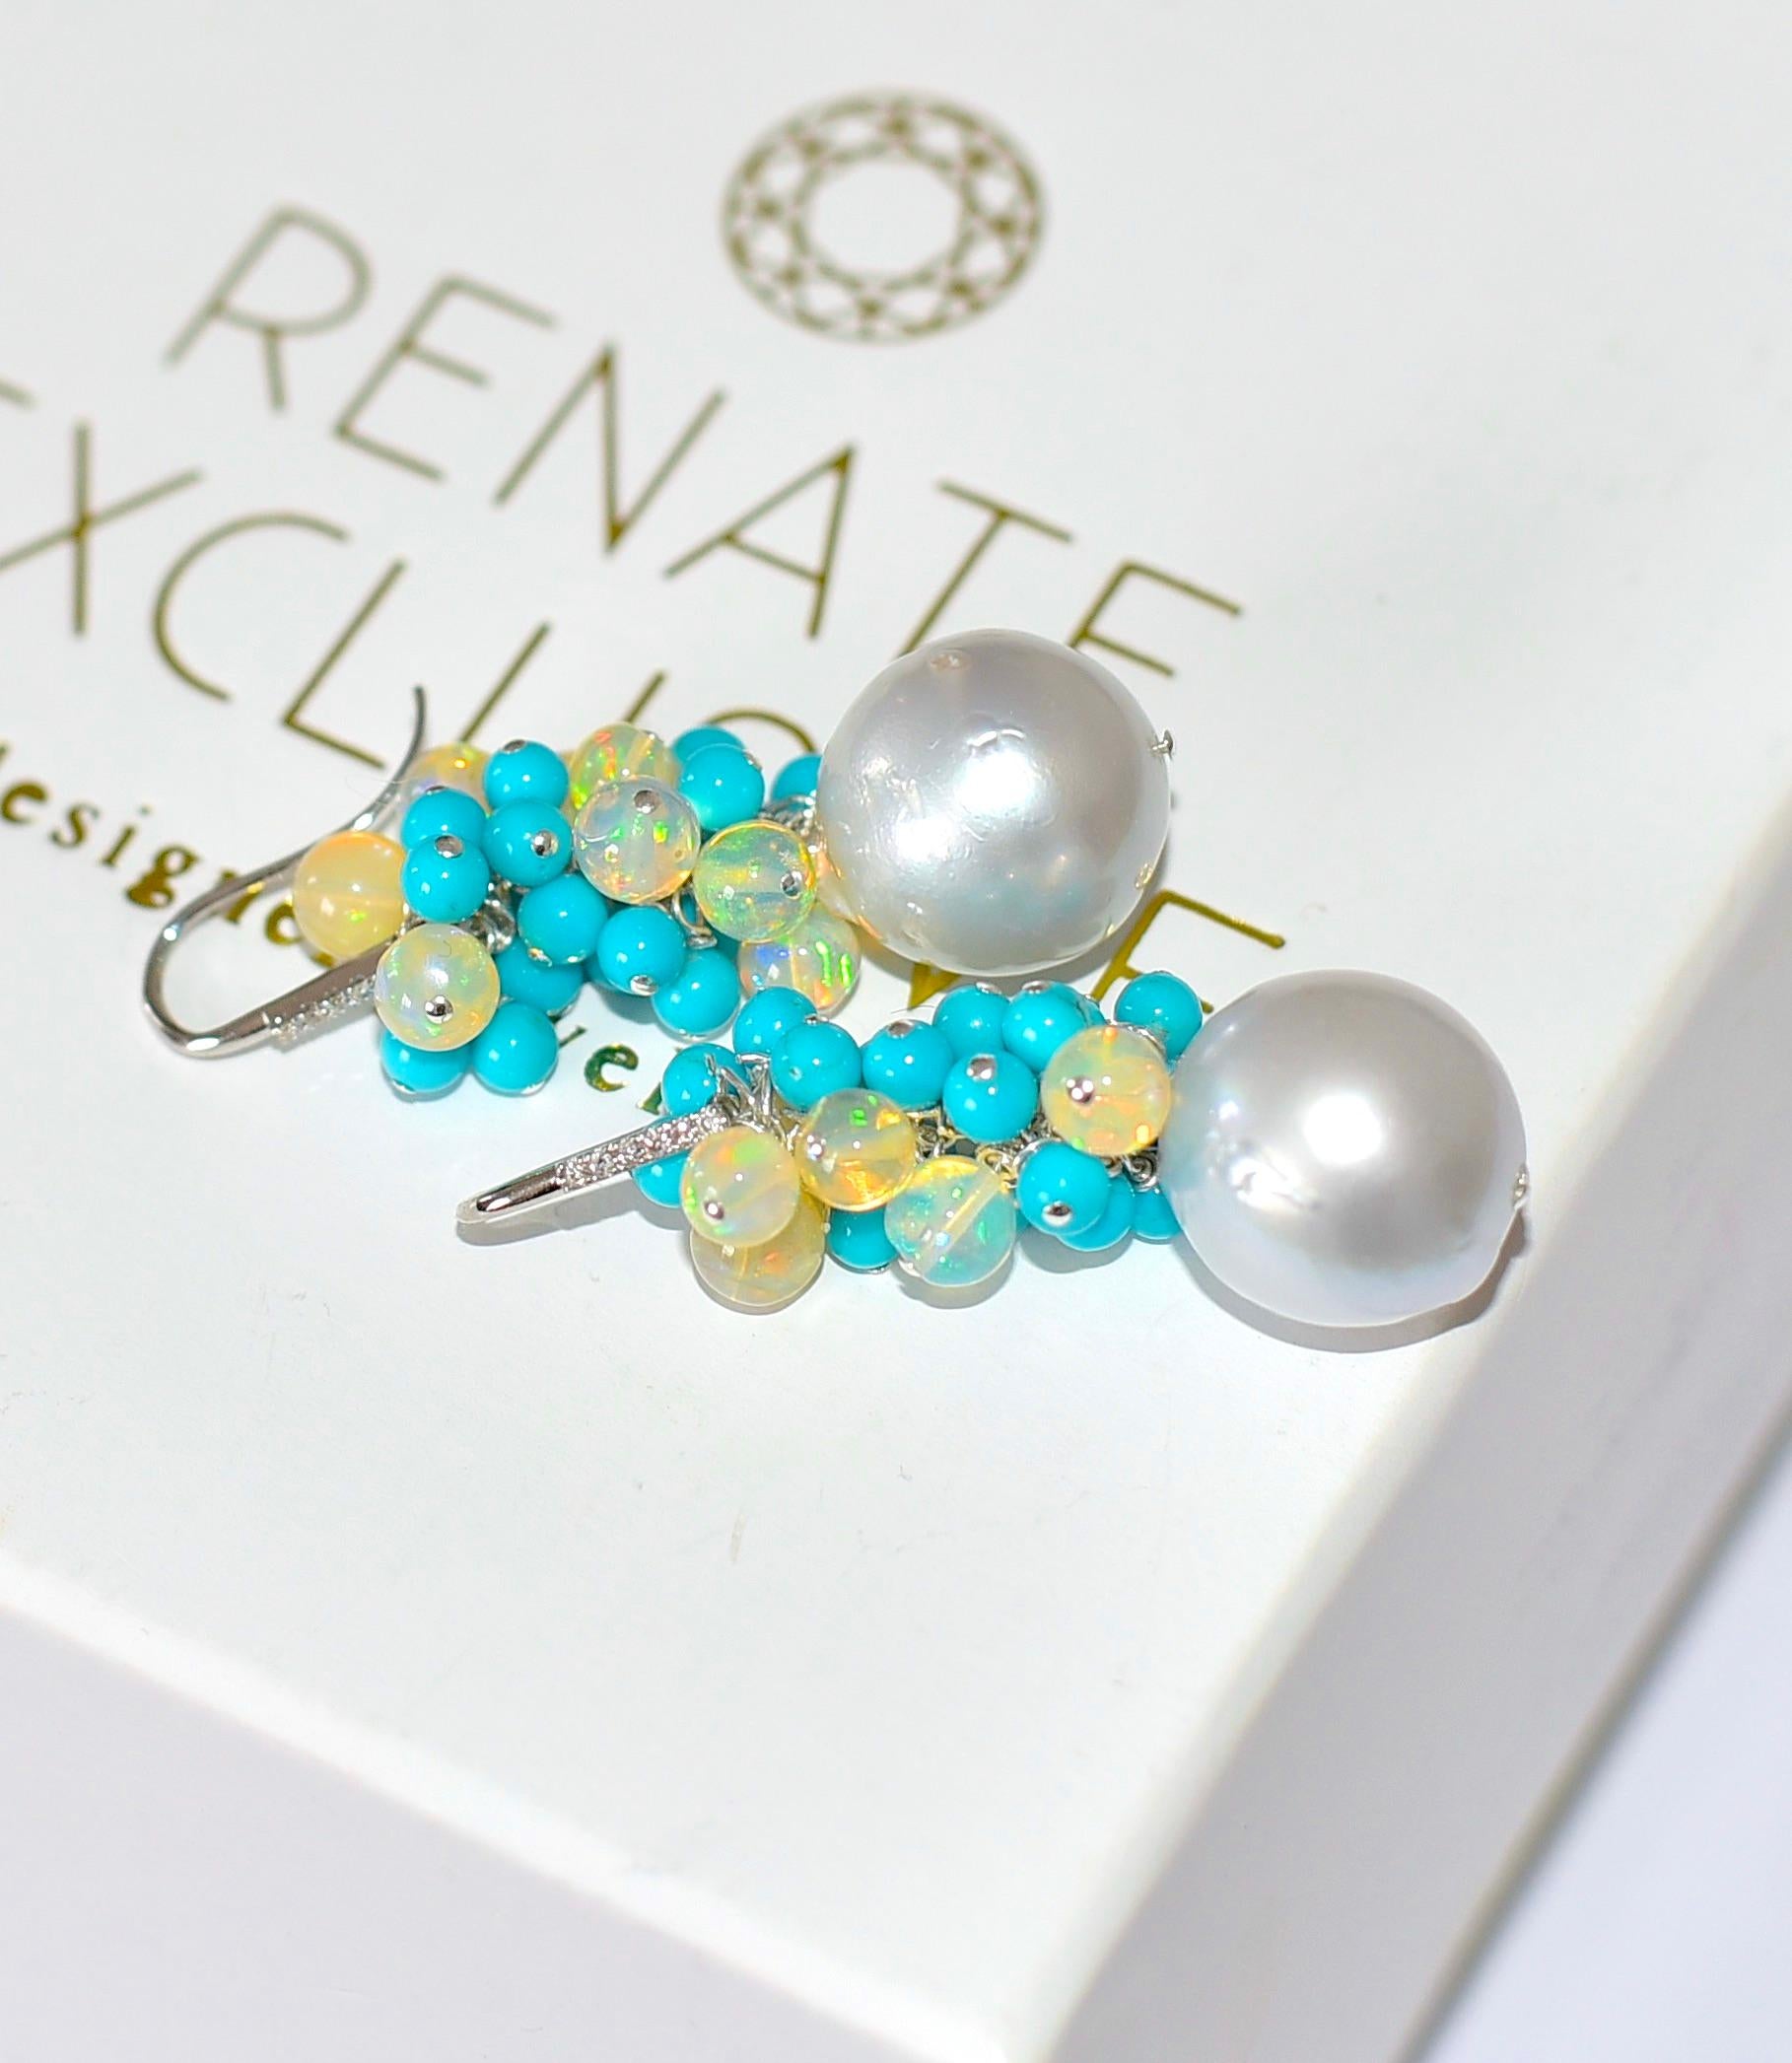 Sleeping Beauty Turquoise, Crystal Opal Earrings in 14K Solid White Gold In New Condition For Sale In Astoria, NY